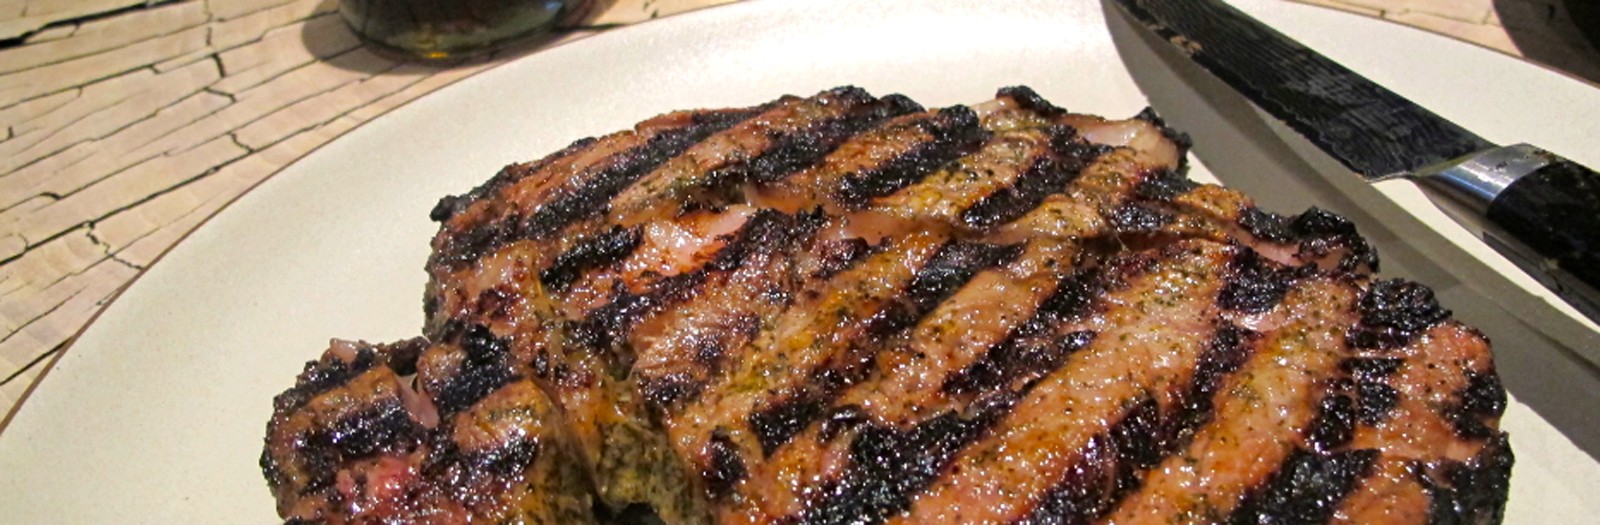 If you love a good steak…try this marinade! Some friends told us abou